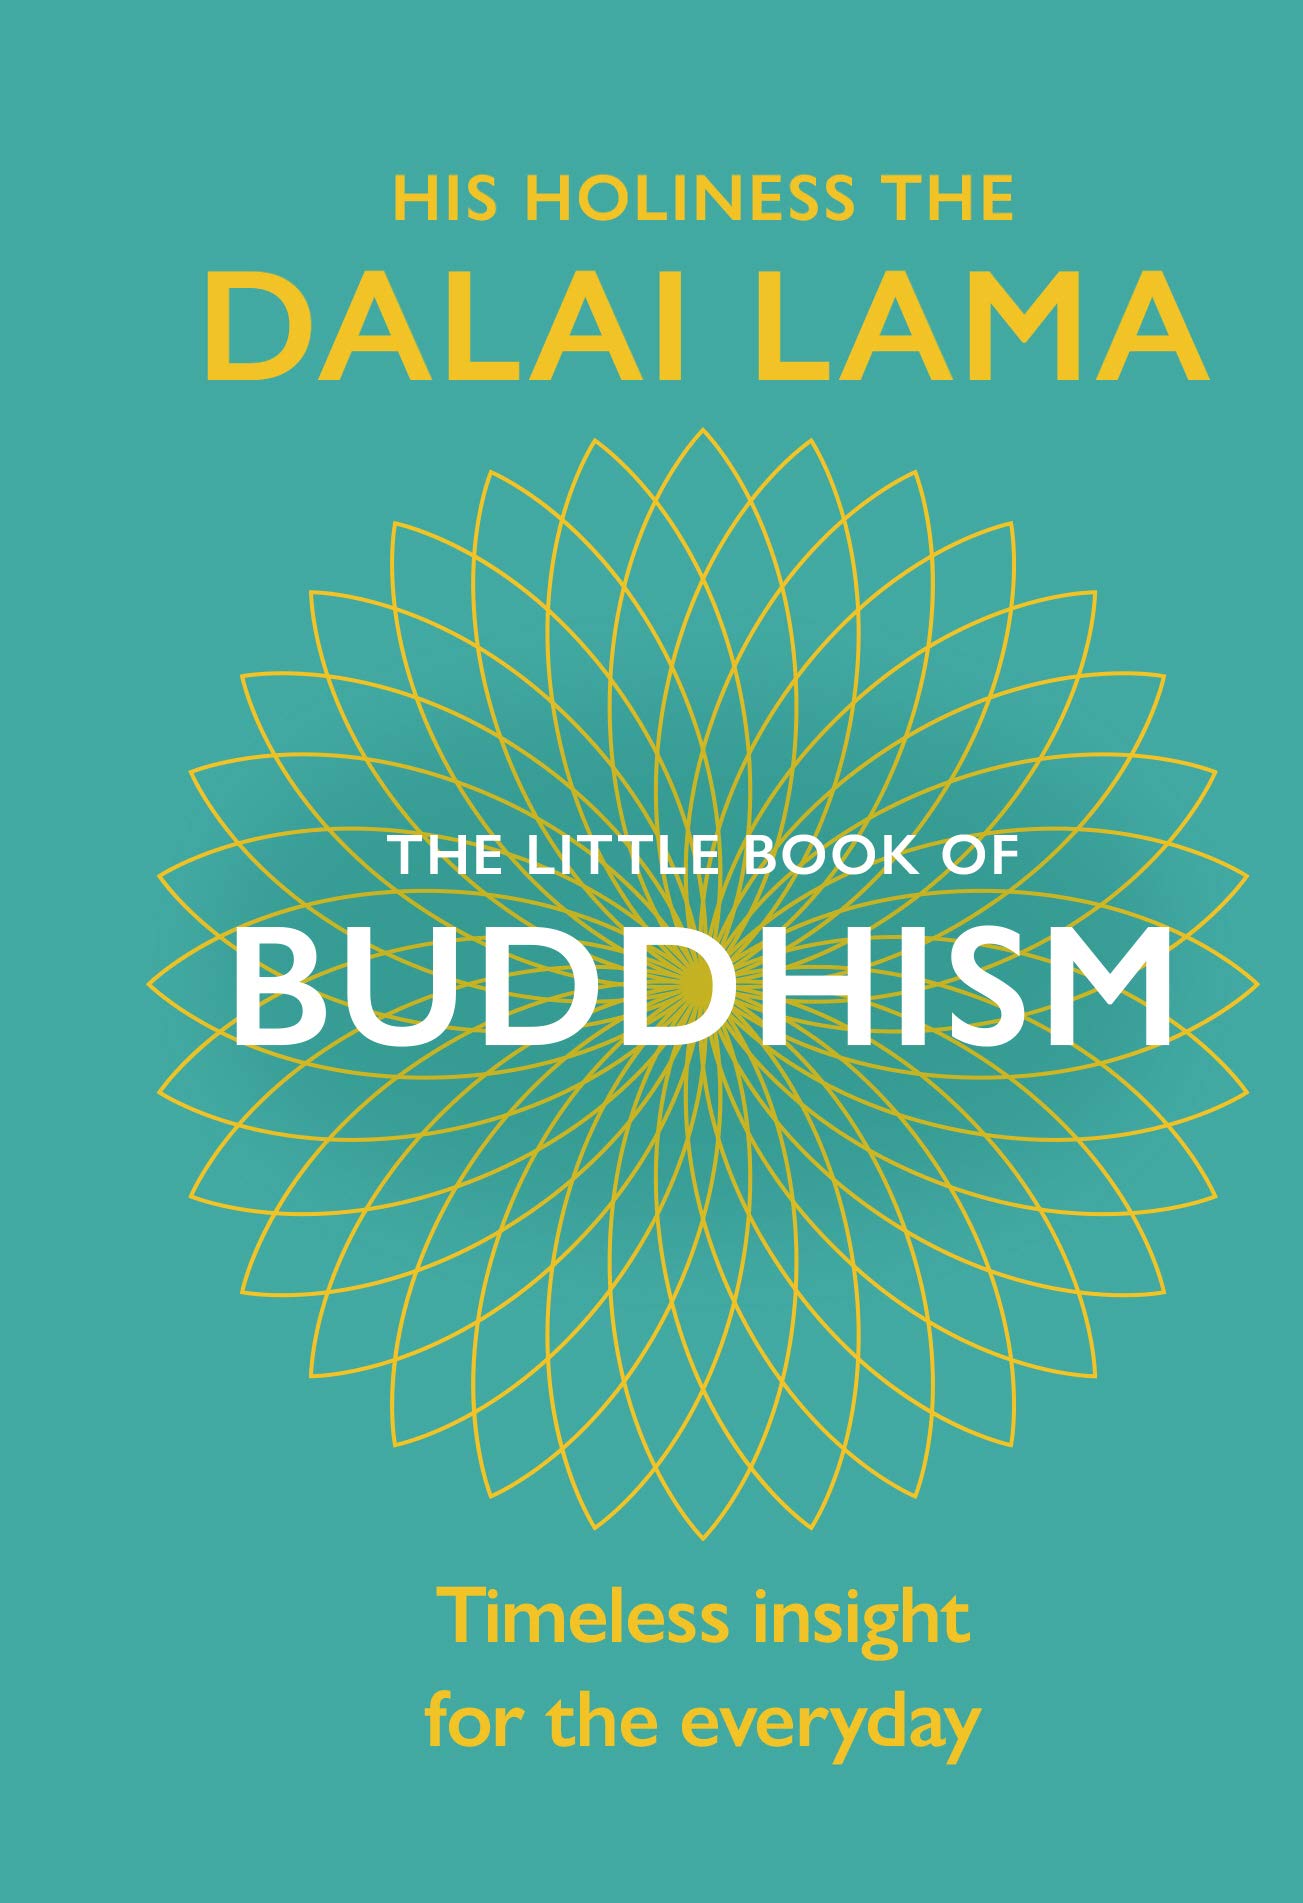 Little Book Of Buddhism